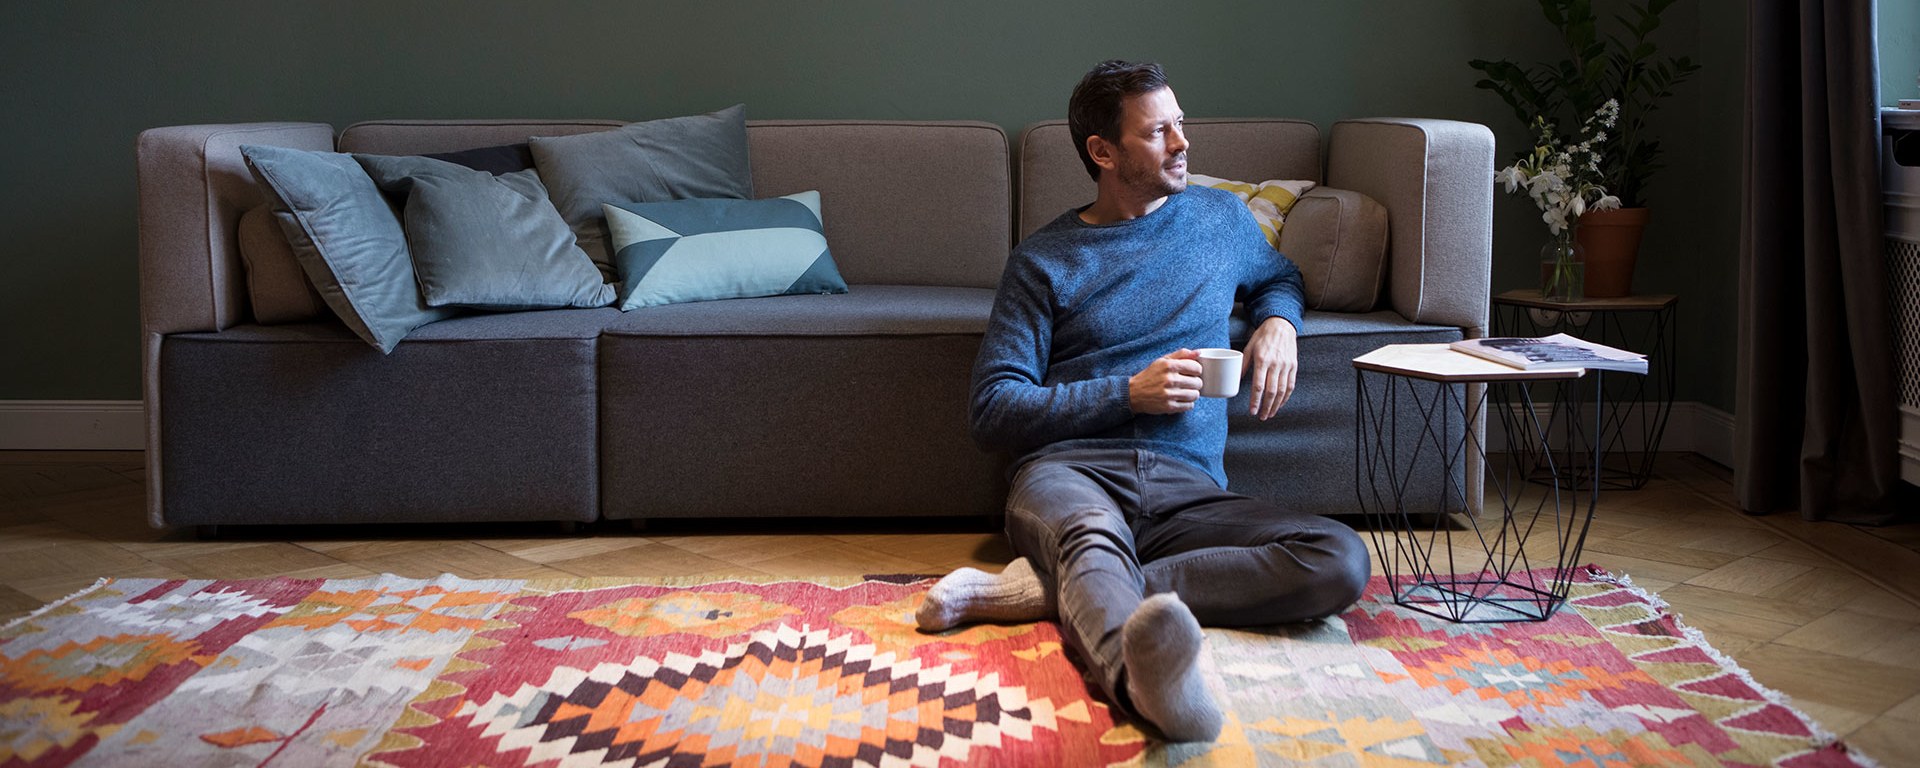 A relaxed man sits on the floor next to a couch, leaning back with a cup in hand, looking to the side. A cozy living room setting with cushions on the sofa.